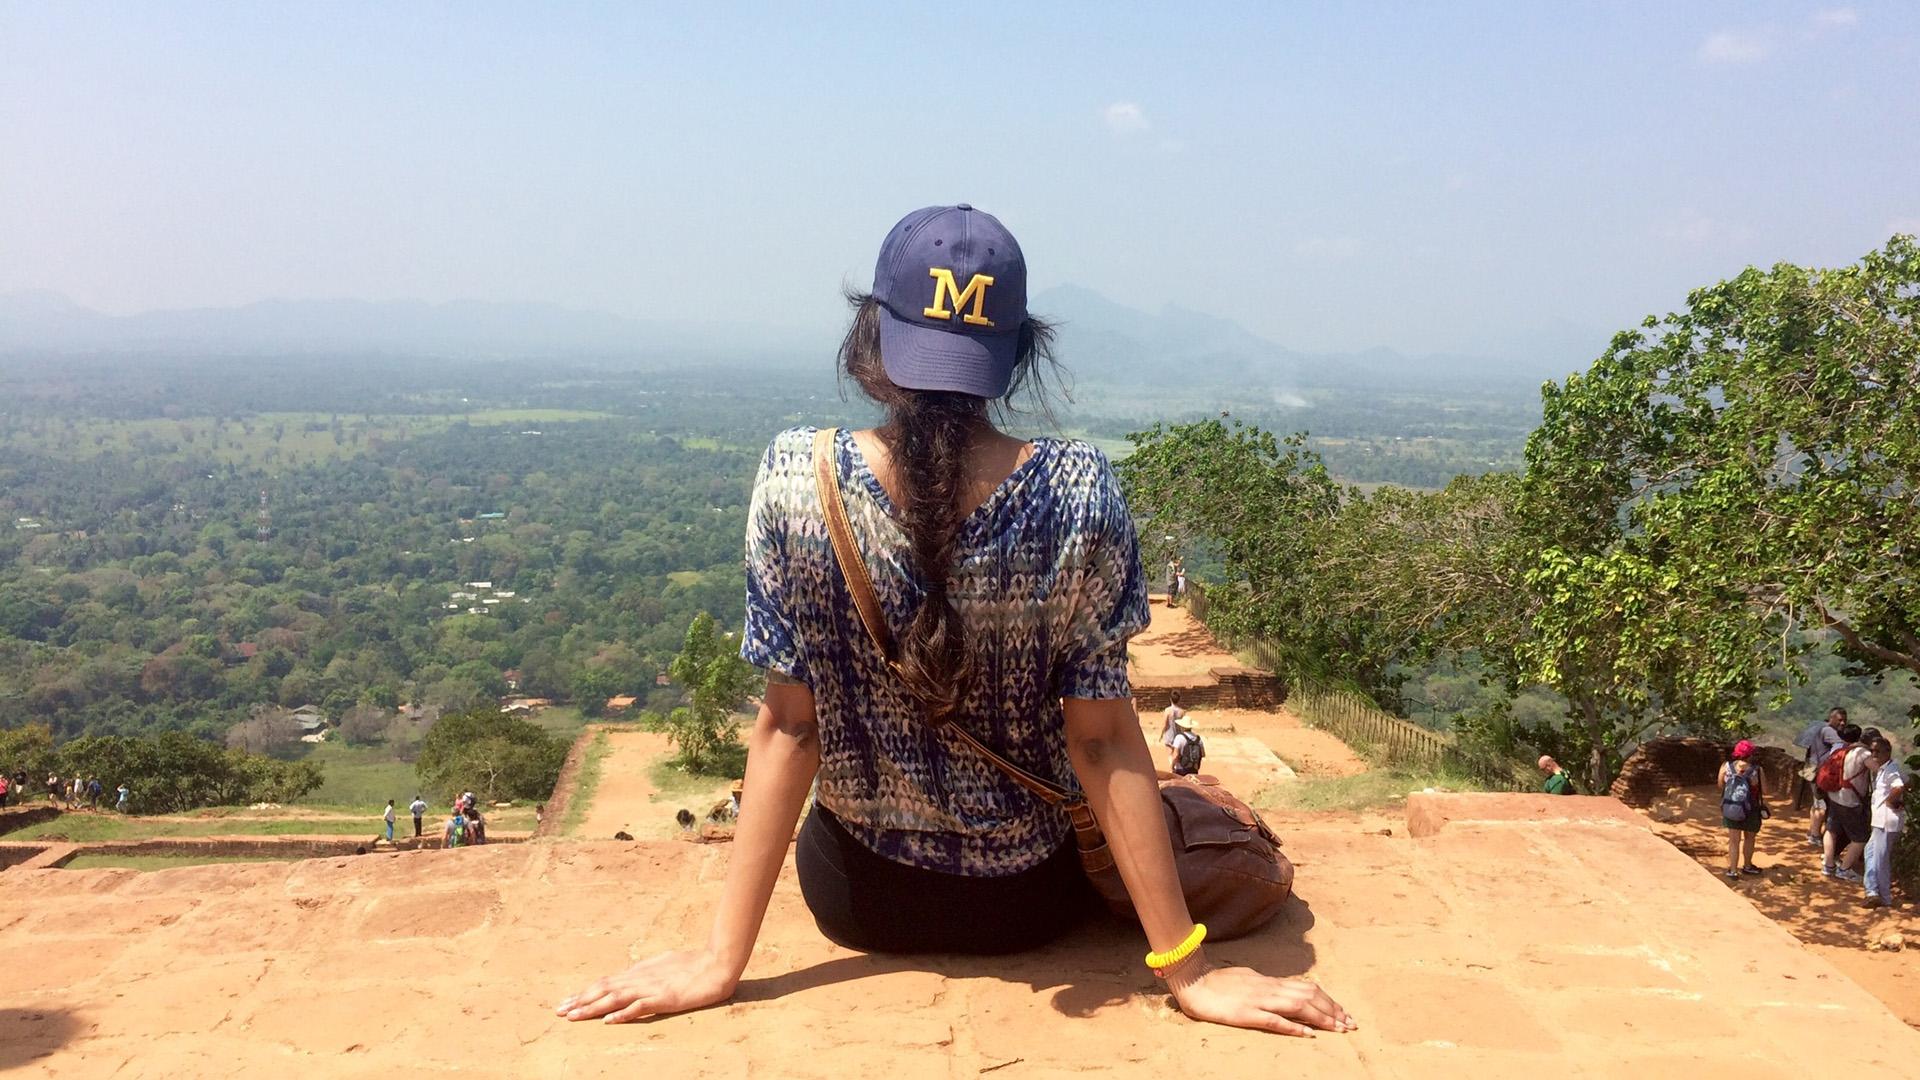 A female student in a Michigan hat looks out at the landscape of Sri Lanka